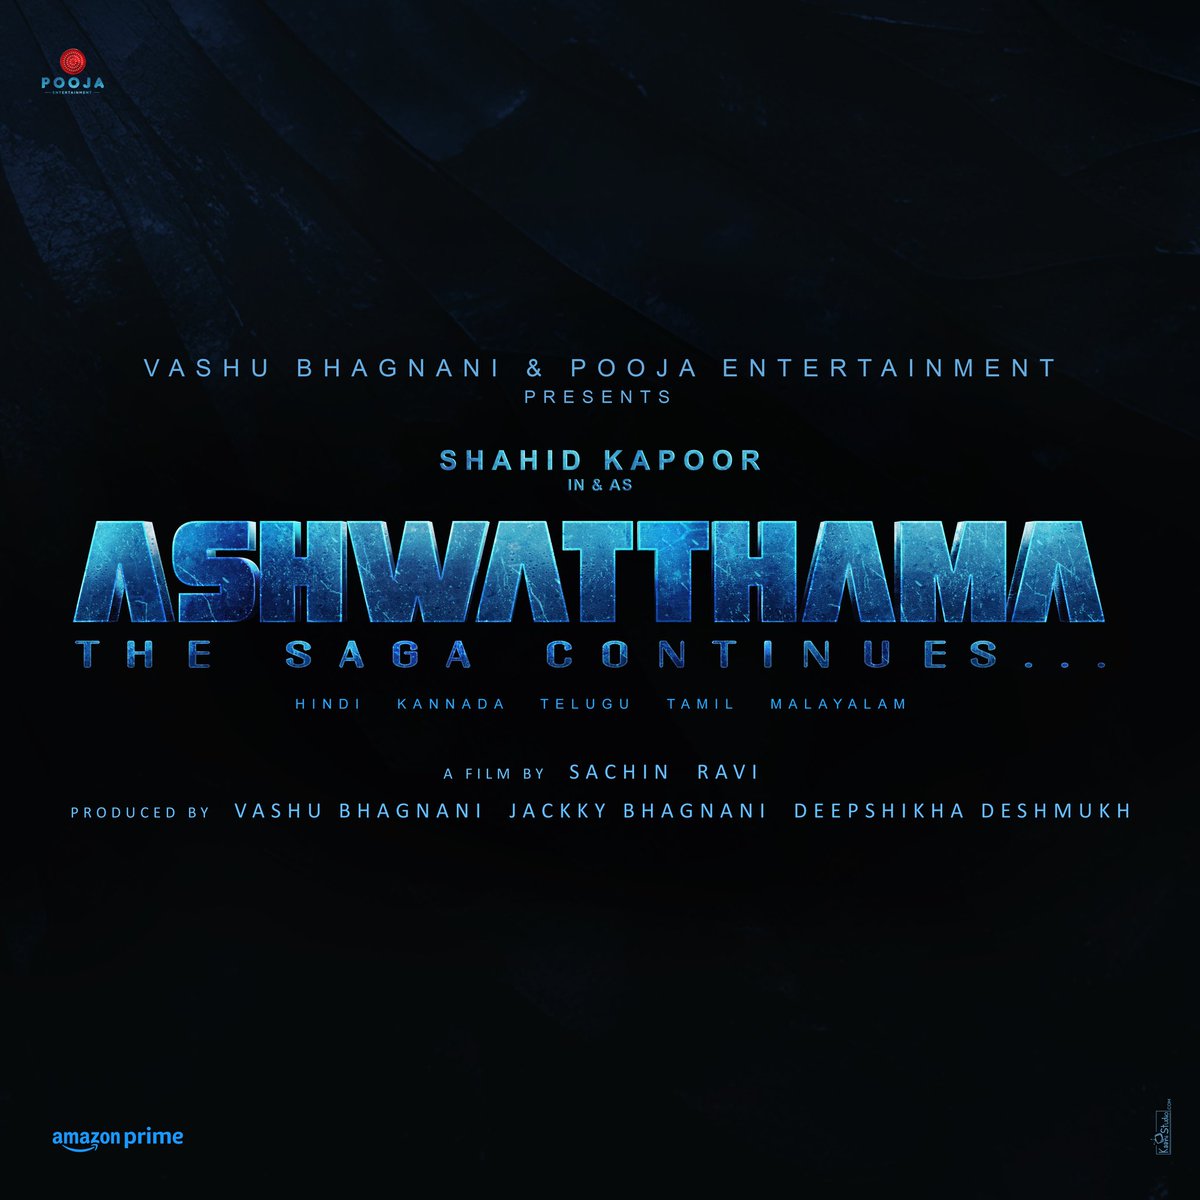 I have grown up listening to the fascinating tales of Mahabharata, so I'm really excited to announce our next venture: 'Ashwatthama - The Saga Continues.' I'm looking forward to collaborating with @shahidkapoor 💯 @poojafilms @honeybhagnani @vashubhagnani @SachinBRavi